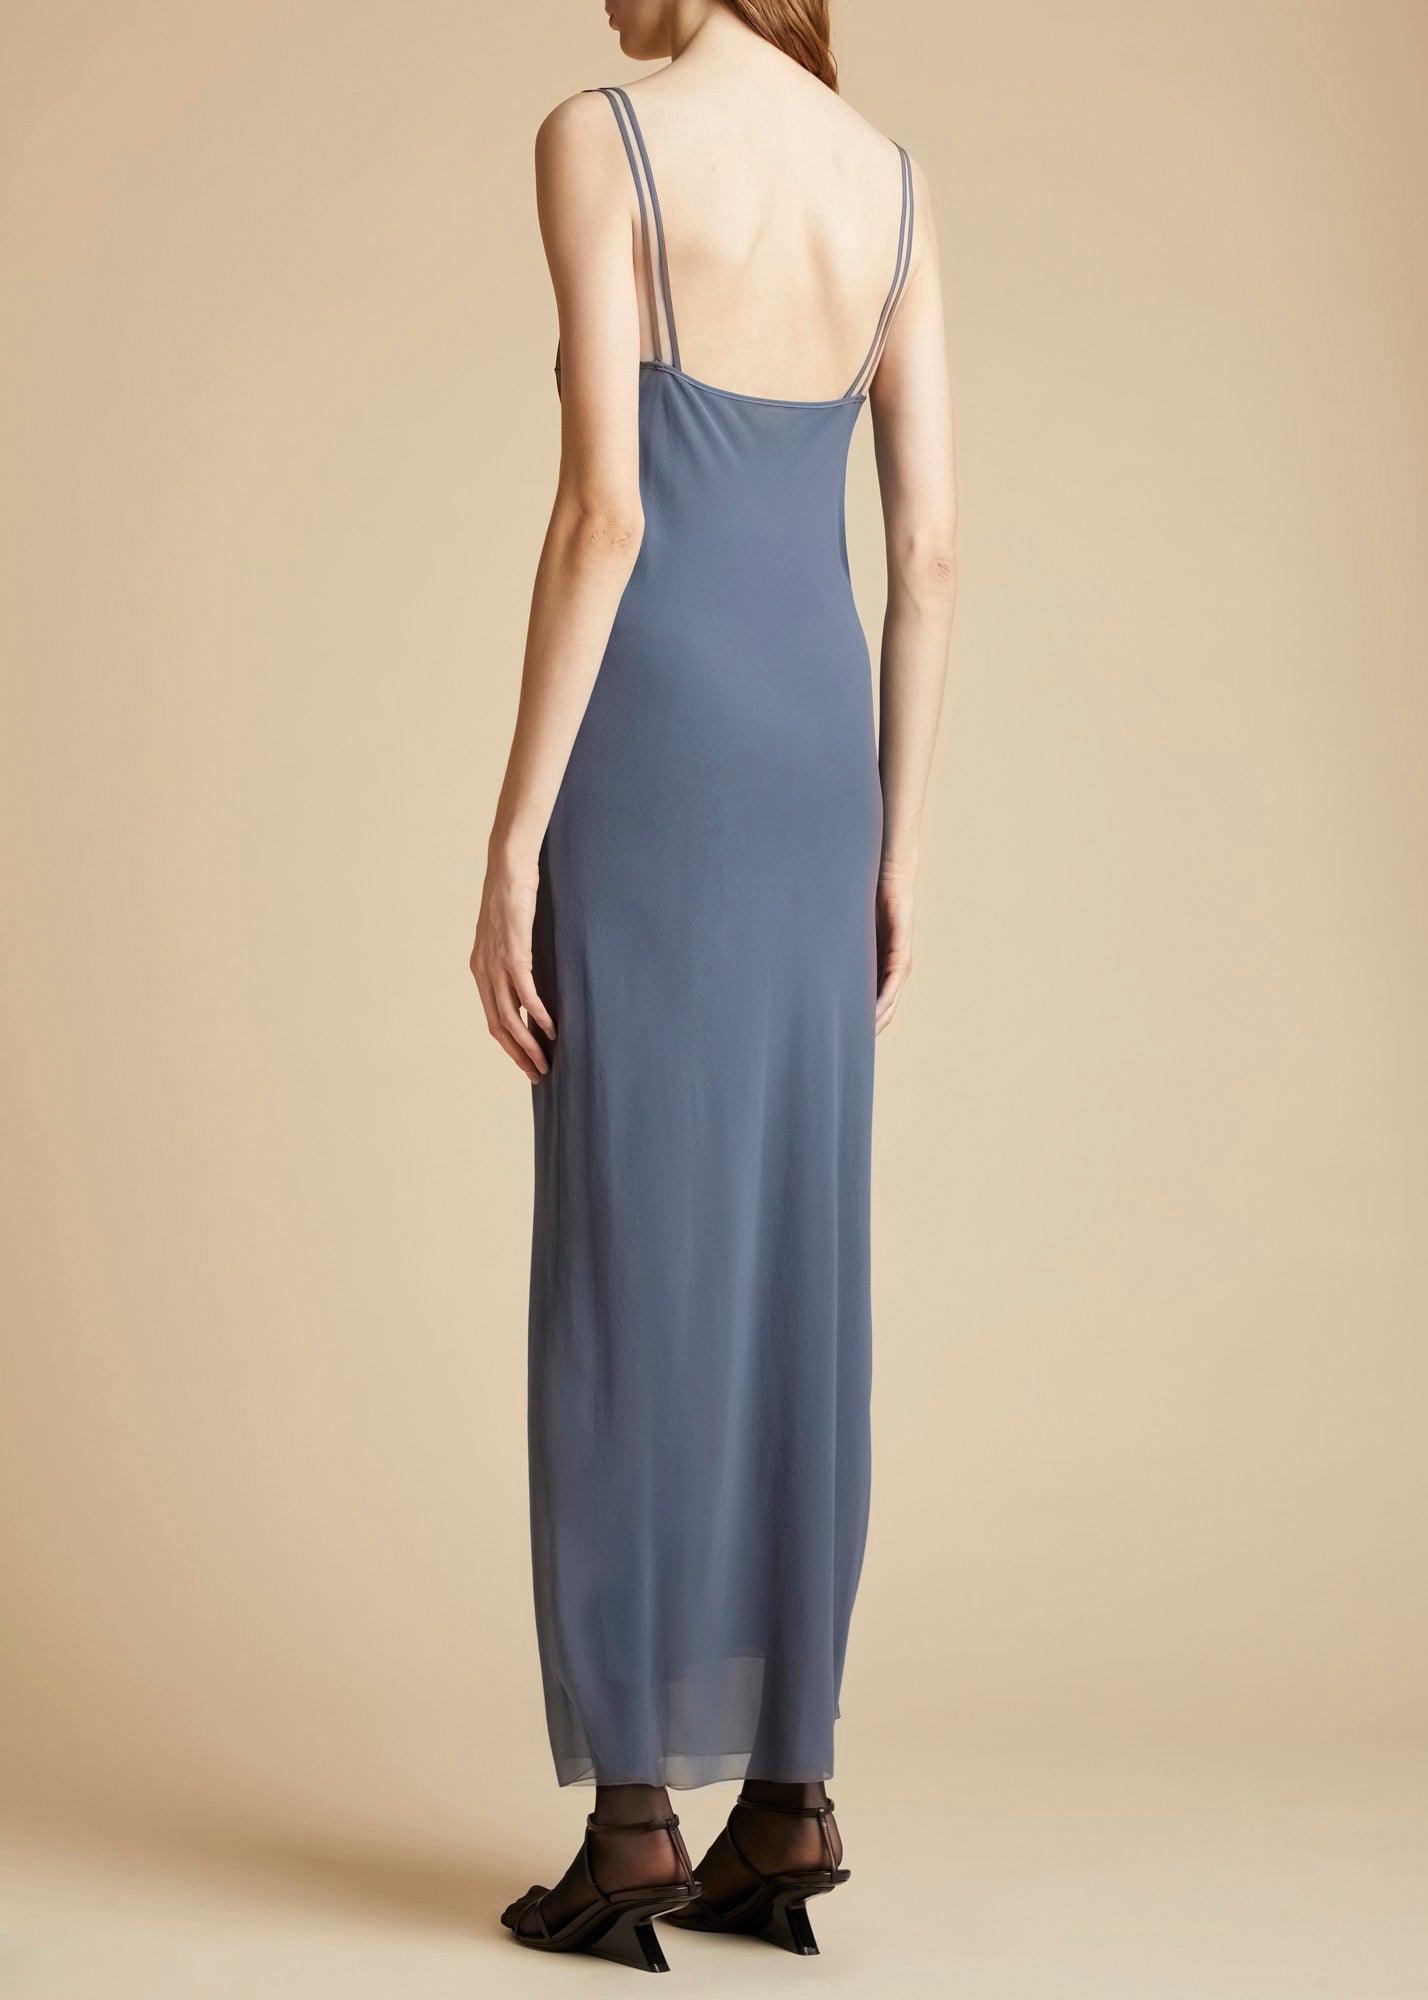 The Allegra Slip Dress in Slate - The Iconic Issue